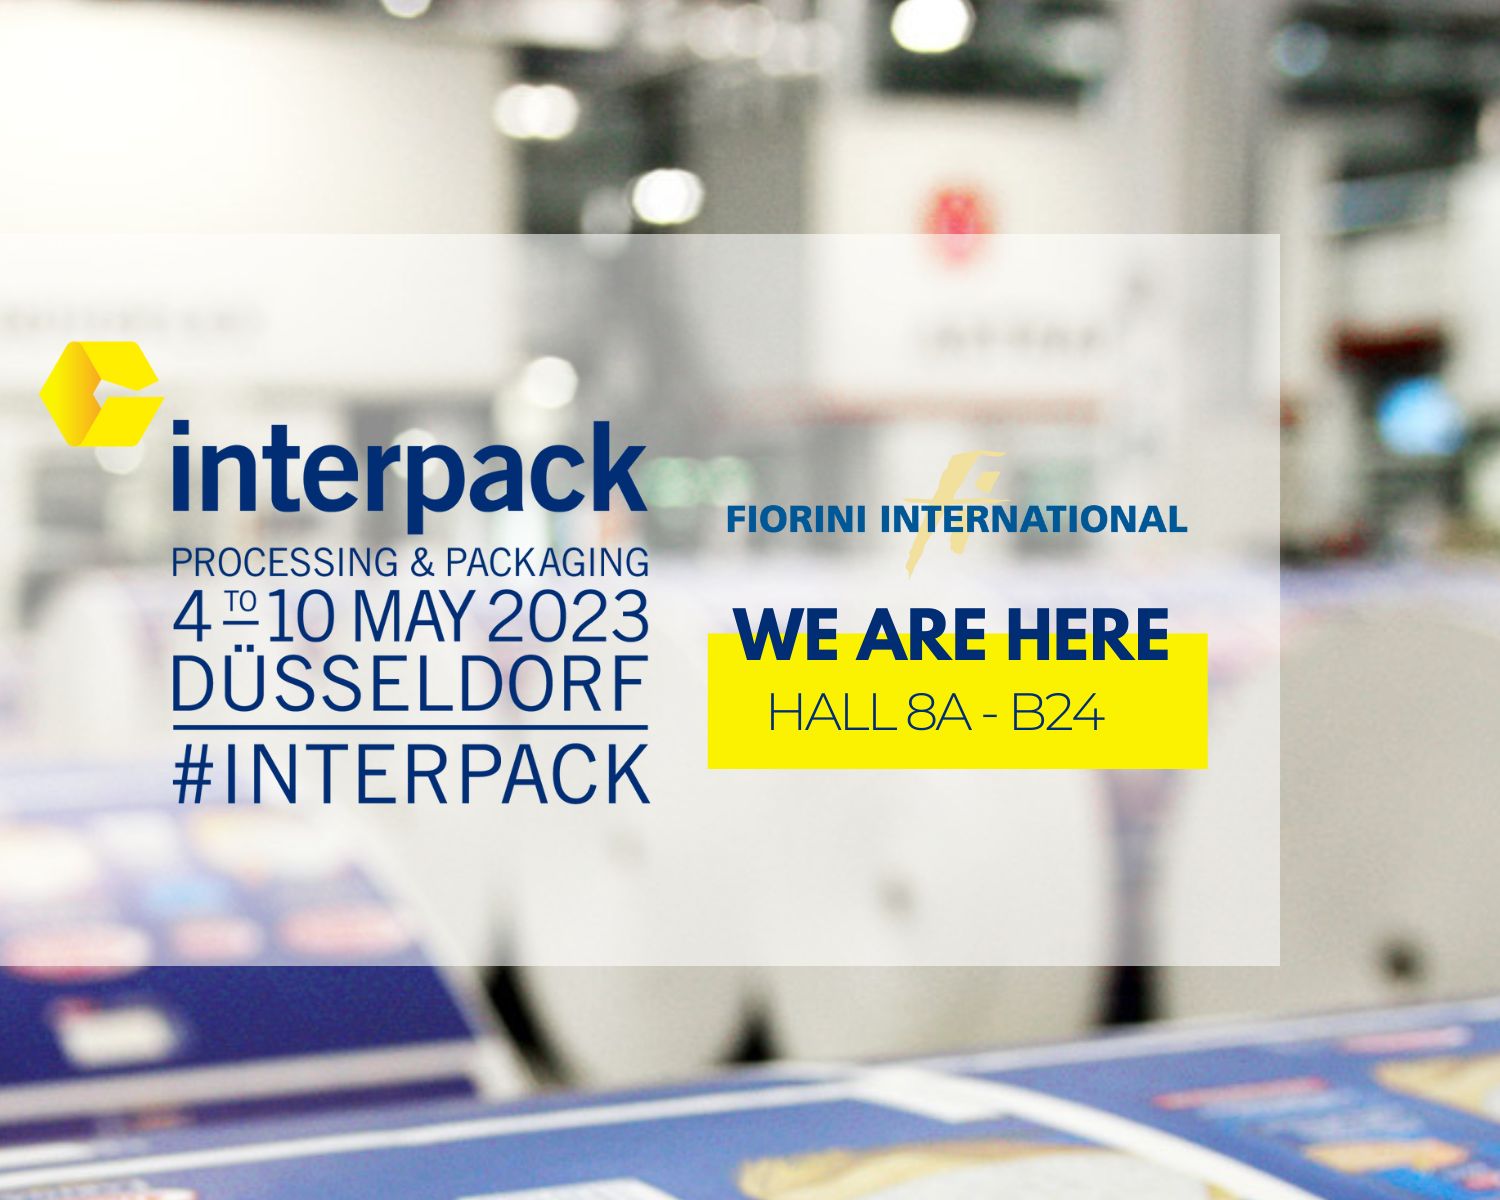 Fiorini International at Interpack 2023: to be unique in packaging production